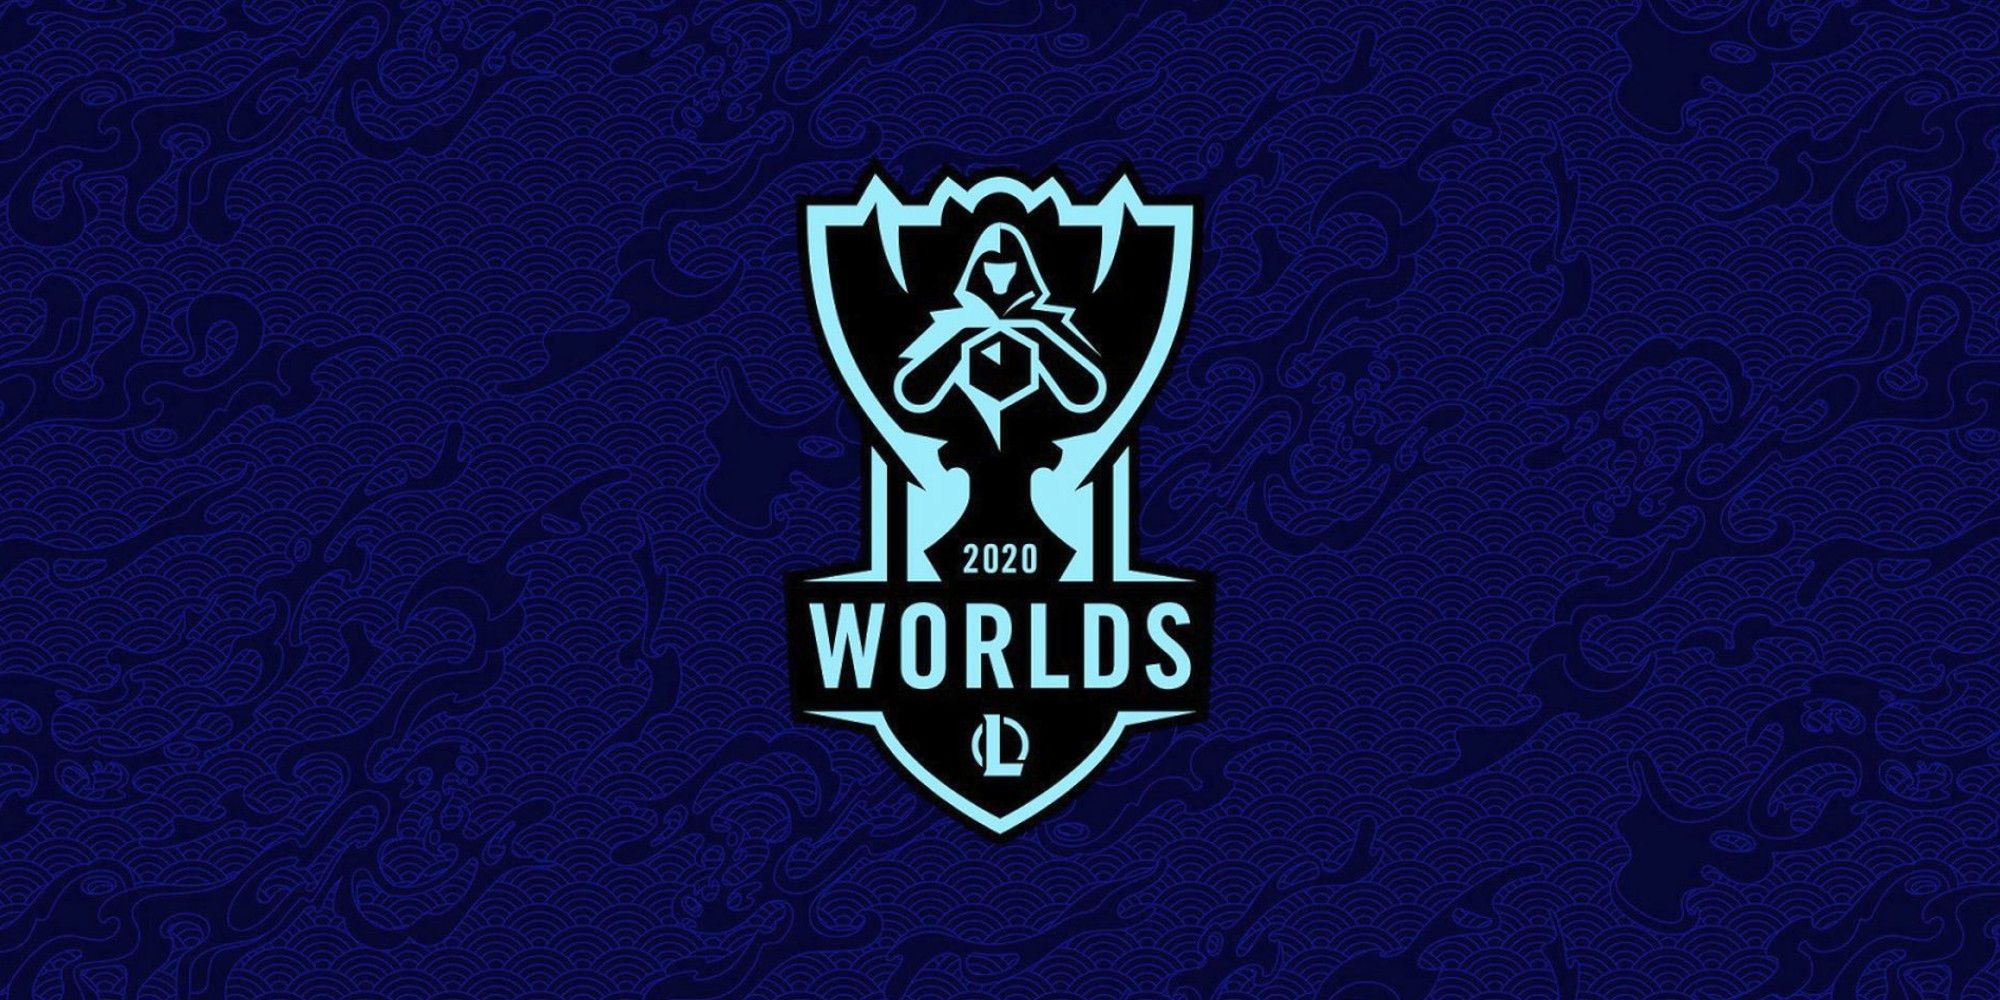 League of Legends Worlds logo on a blue background